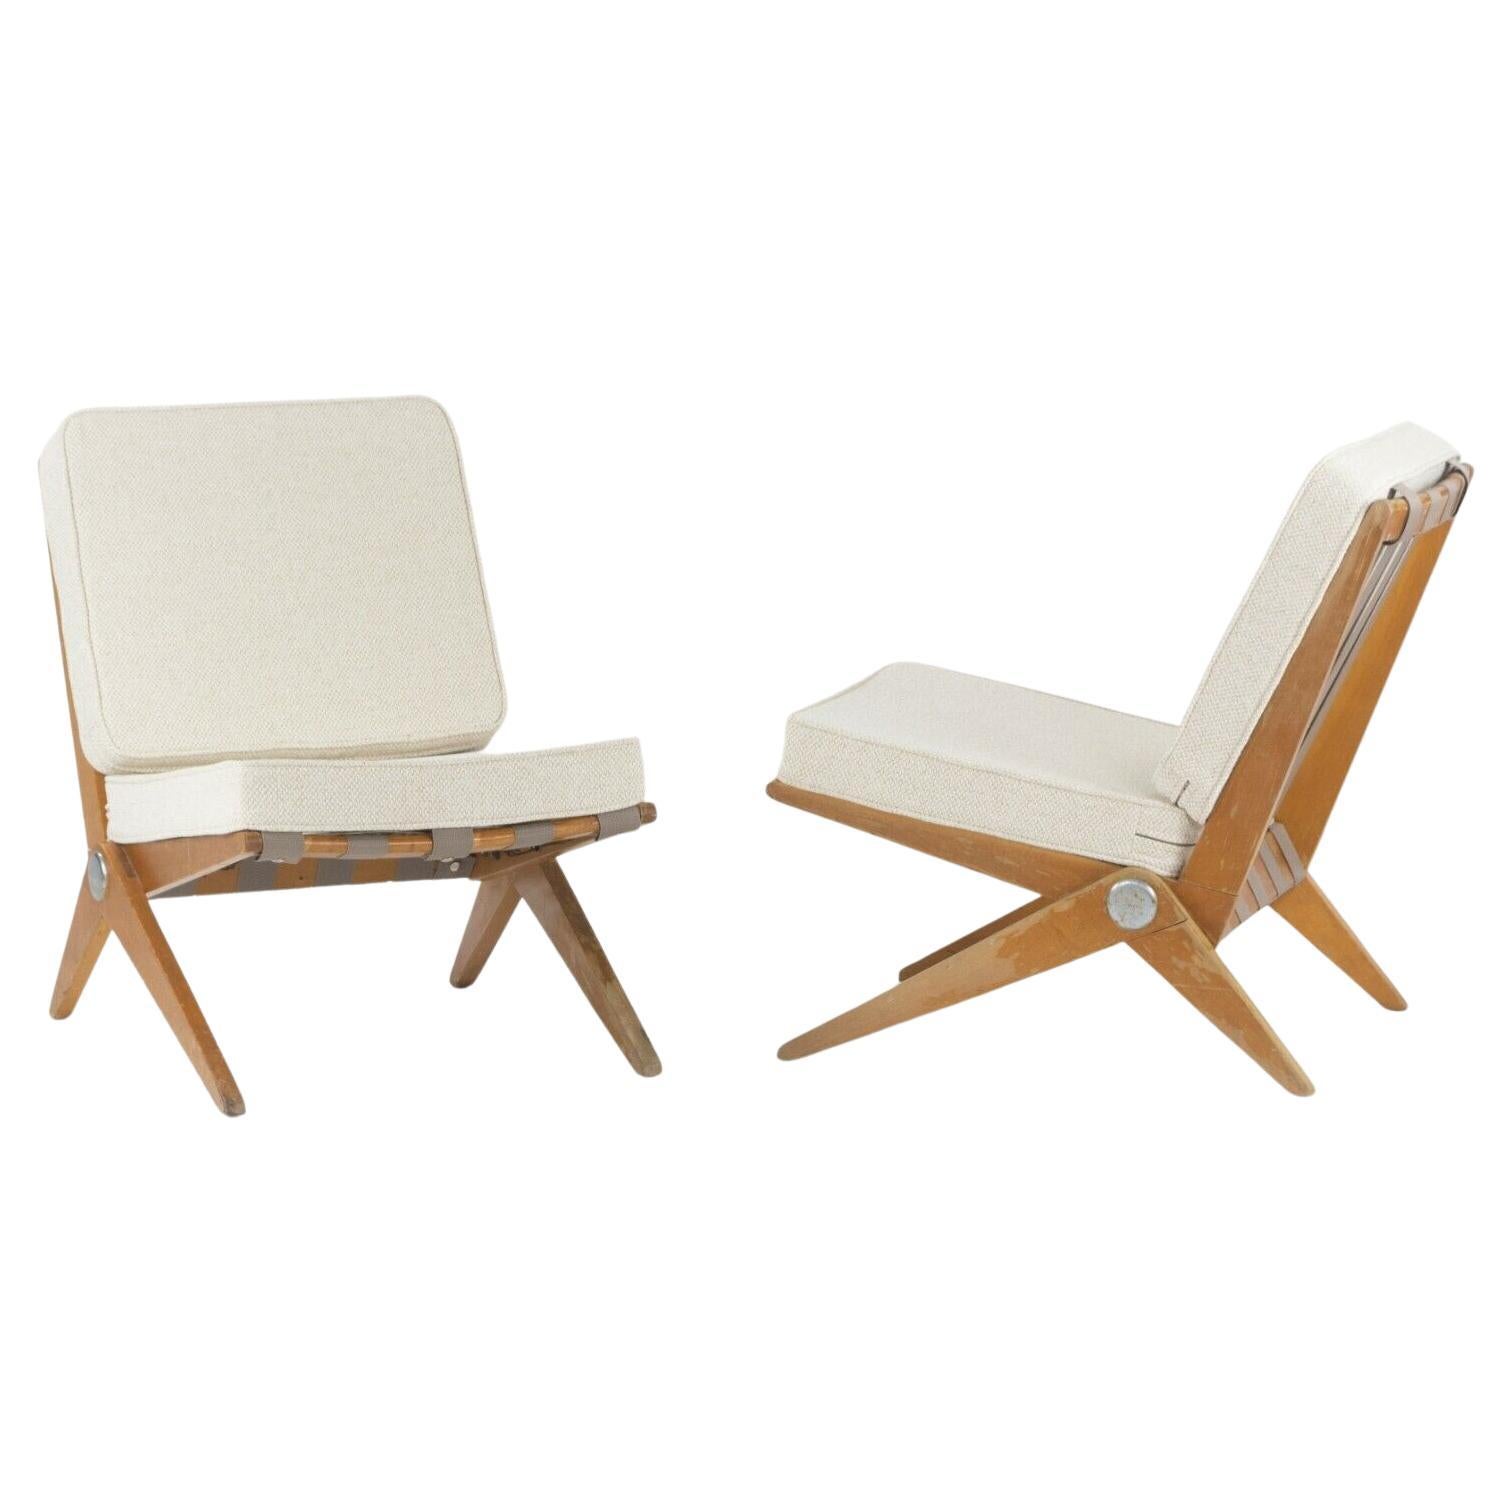 1948 Pair of Pierre Jeanneret for Knoll Associates No. 92 Scissor Lounge Chairs For Sale